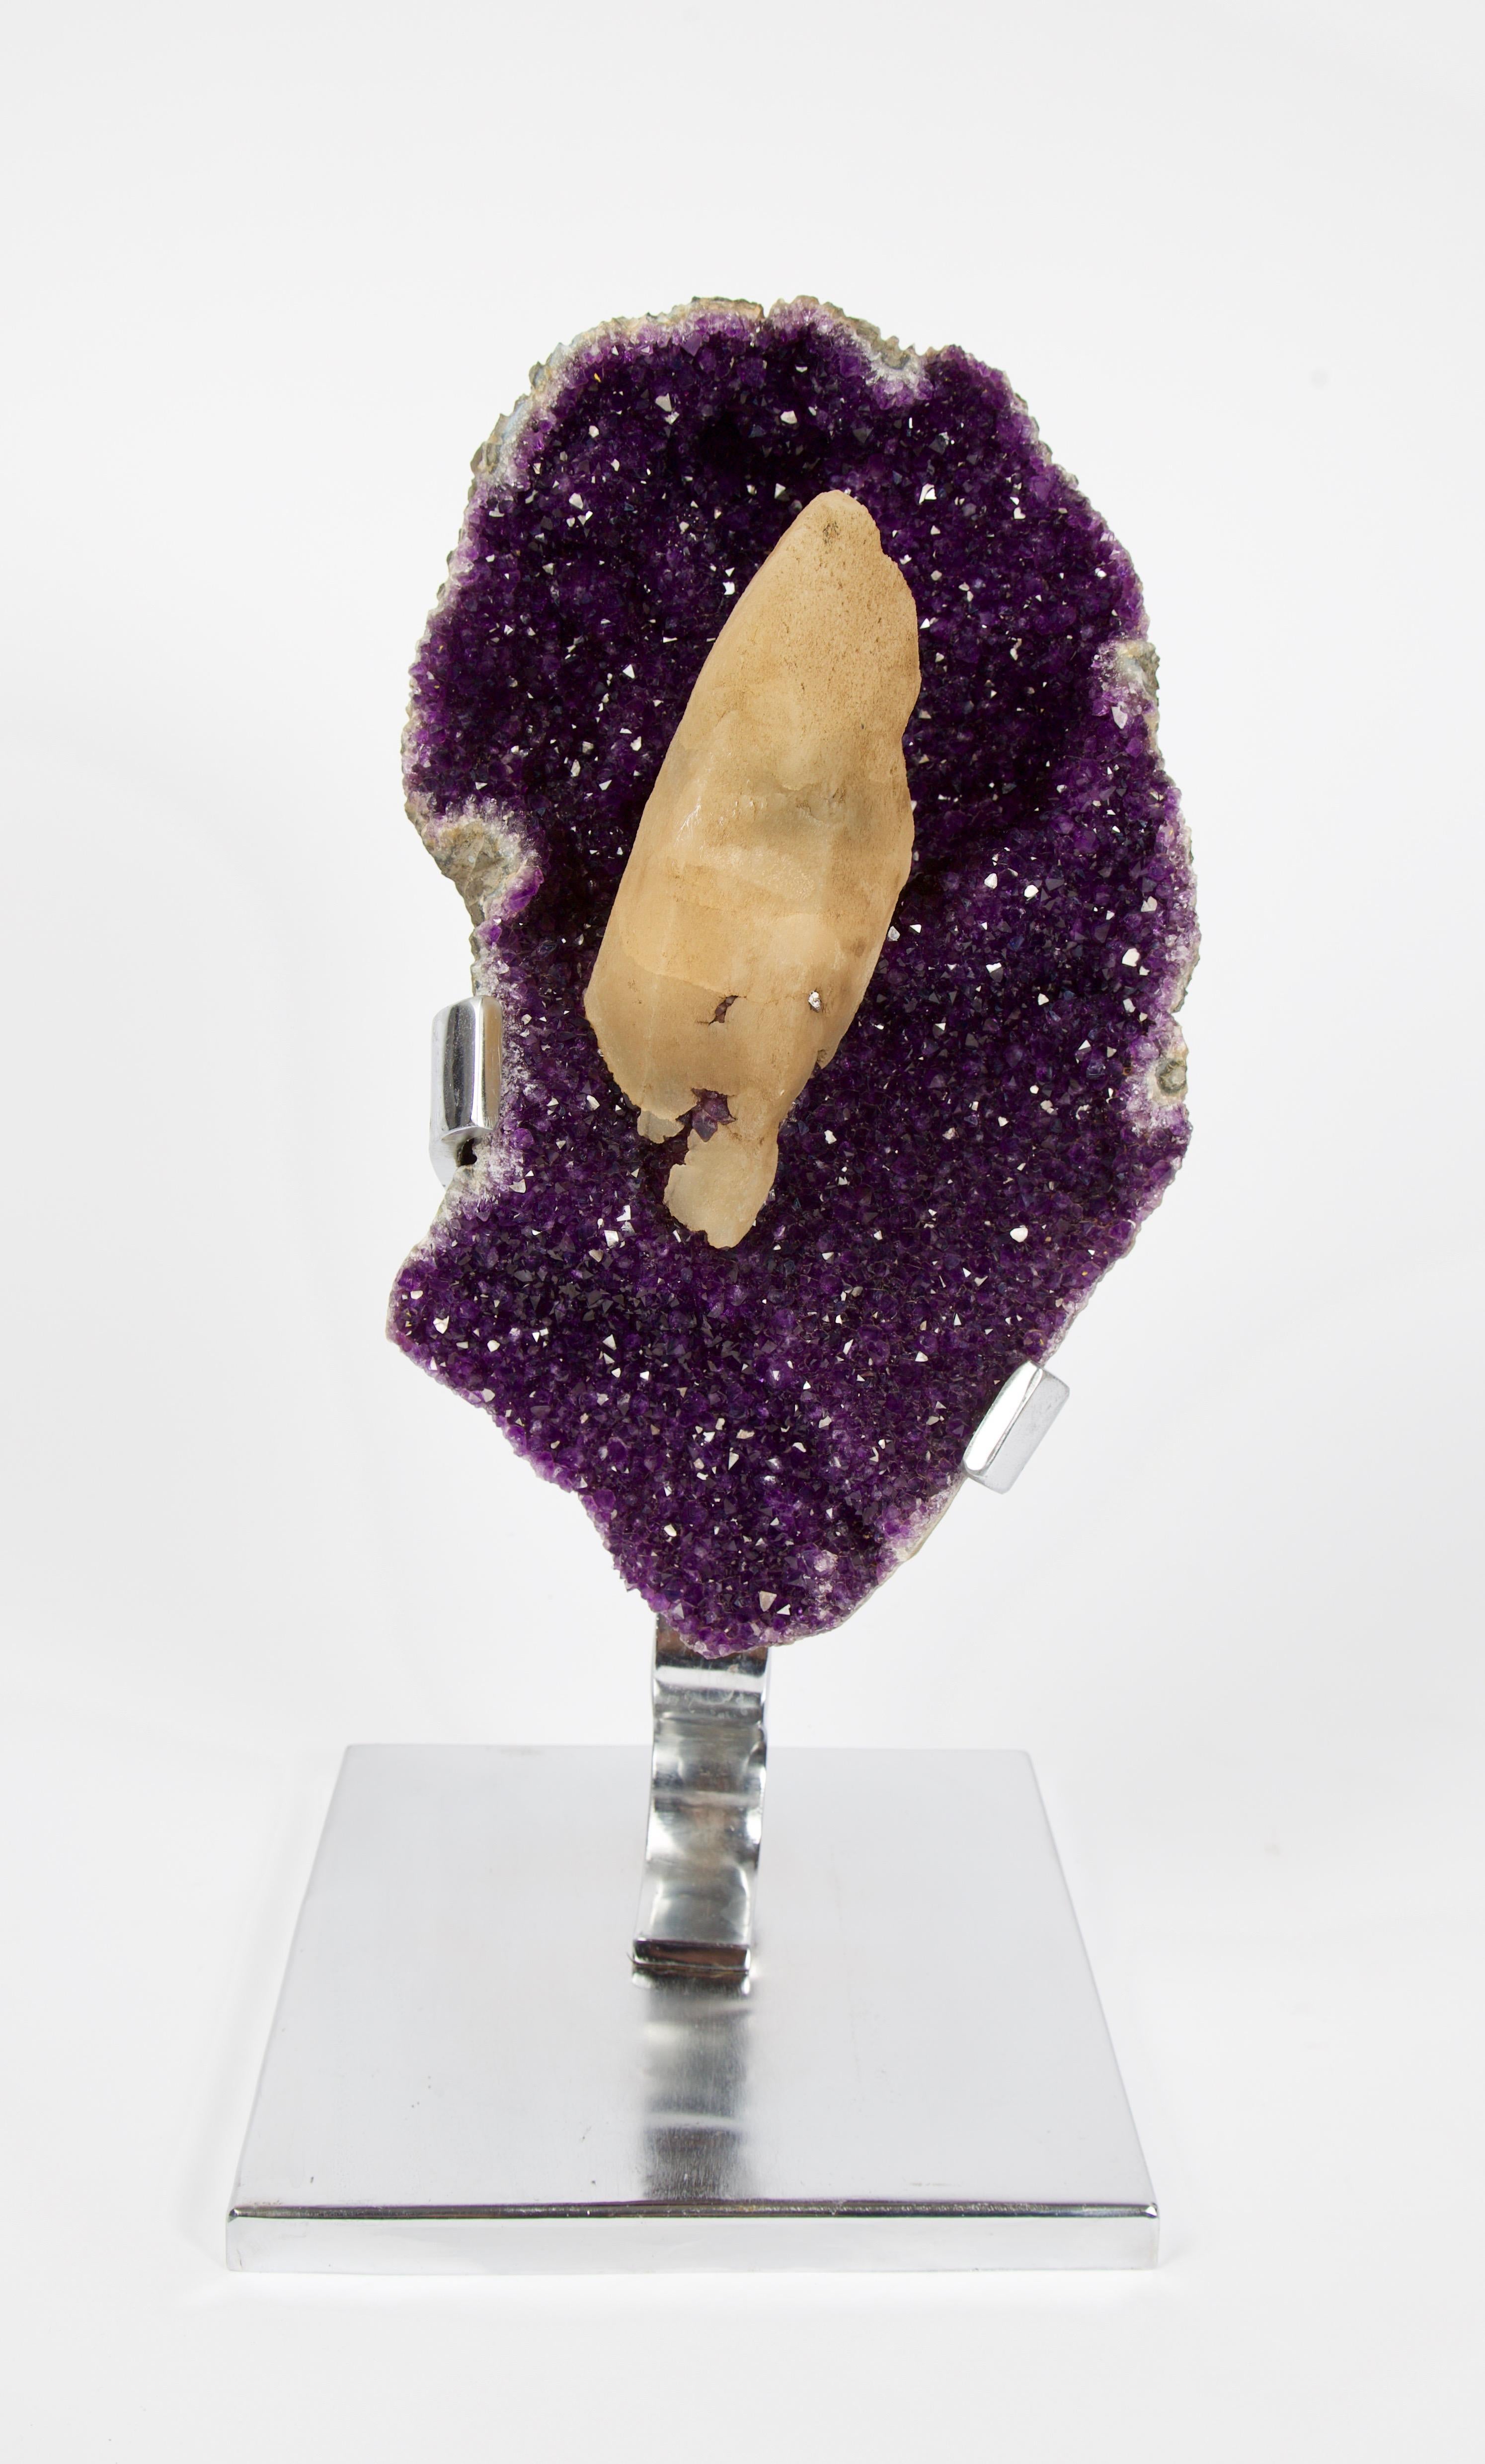 The amethyst geodes from Uruguay are mined from the same rock formation as their relatives just to the north across the border into southern Brazil and are igneous (volcanic) in origin. Uruguay amethyst, however, can usually be differentiated from